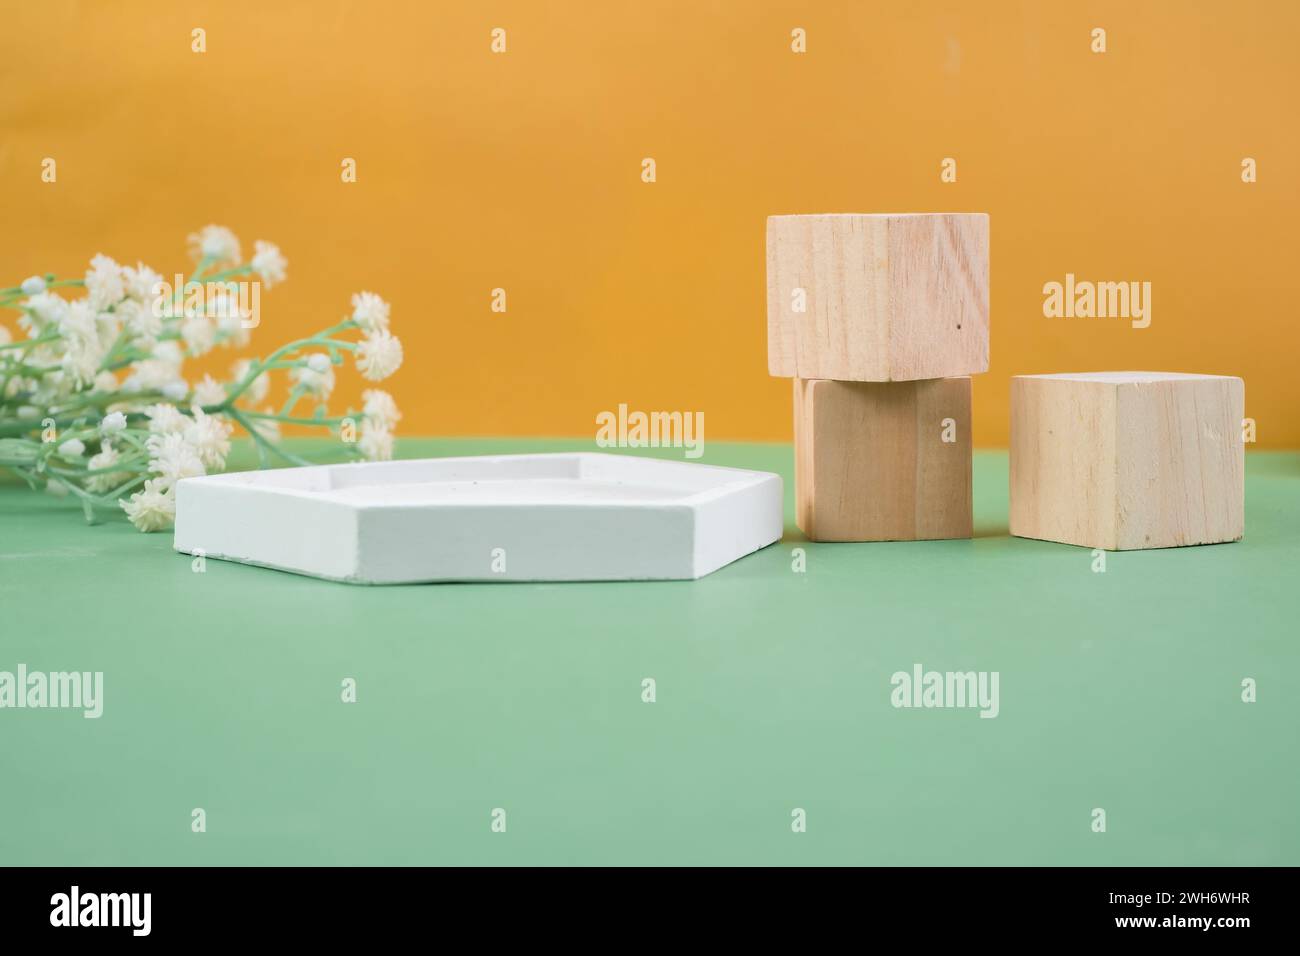 Wooden cube podium on yellow background. Display case for cosmetic products. Product advertising. Layout style display. Stock Photo